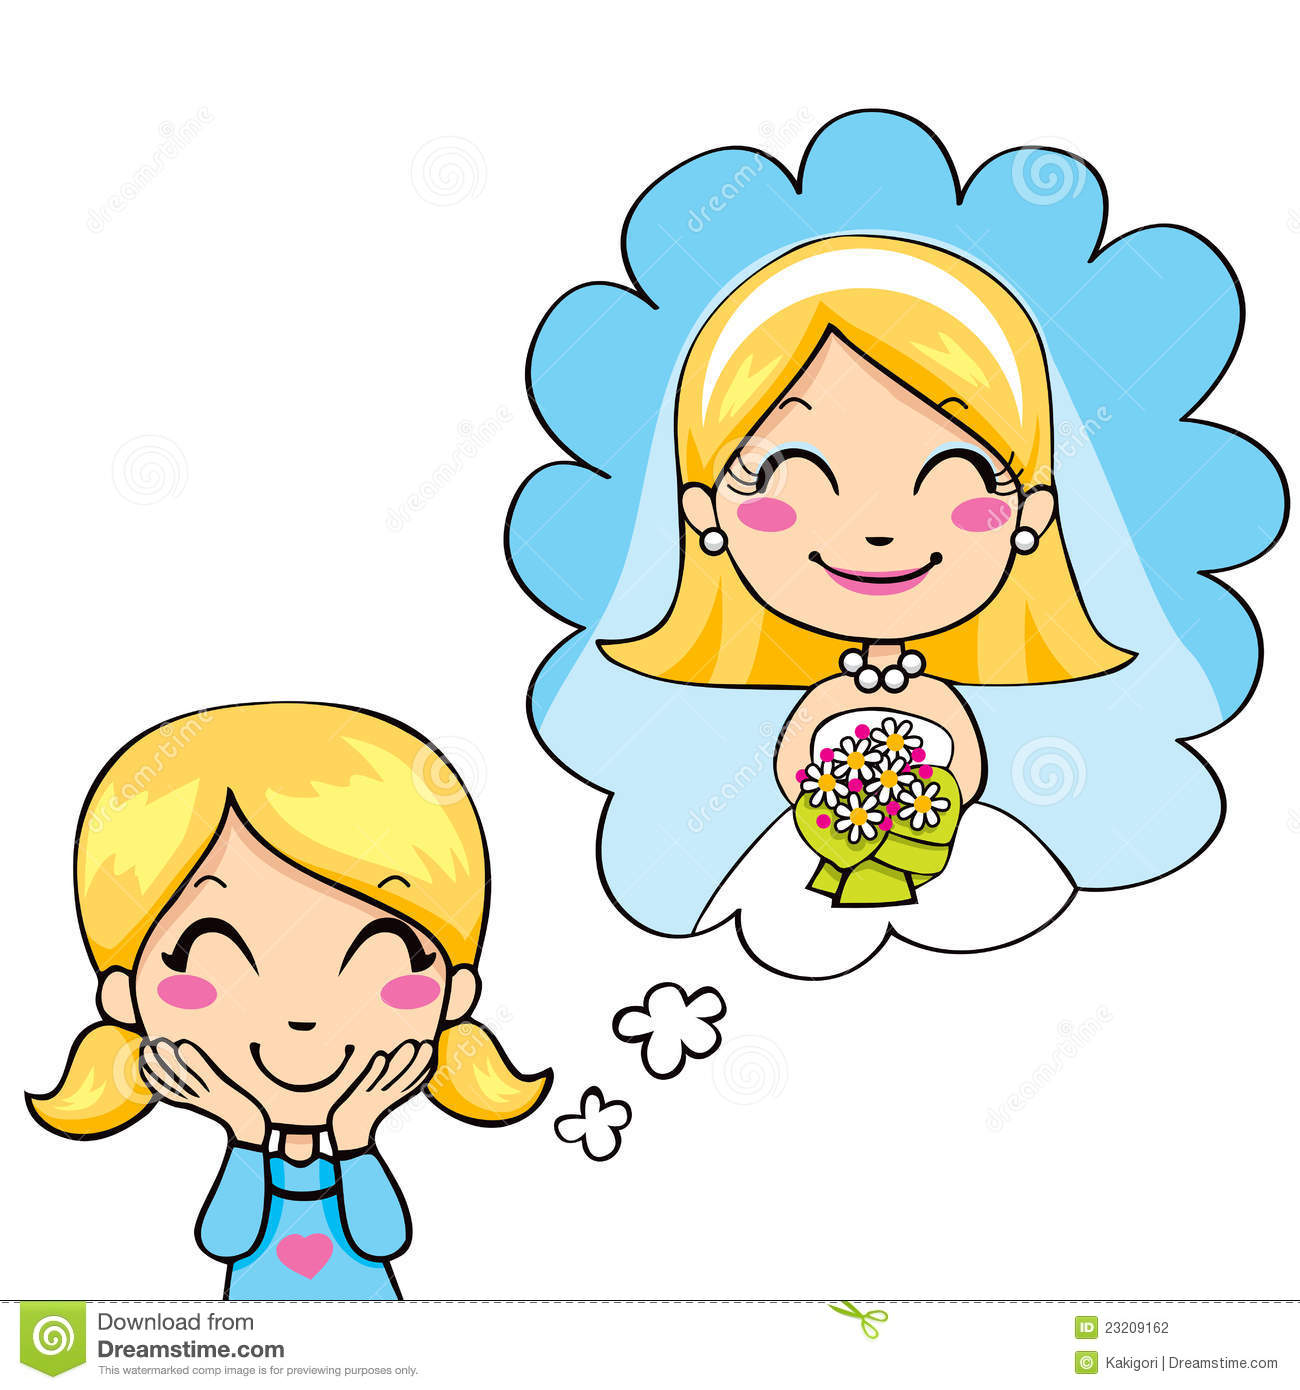 girl daydreaming clipart - photo #8